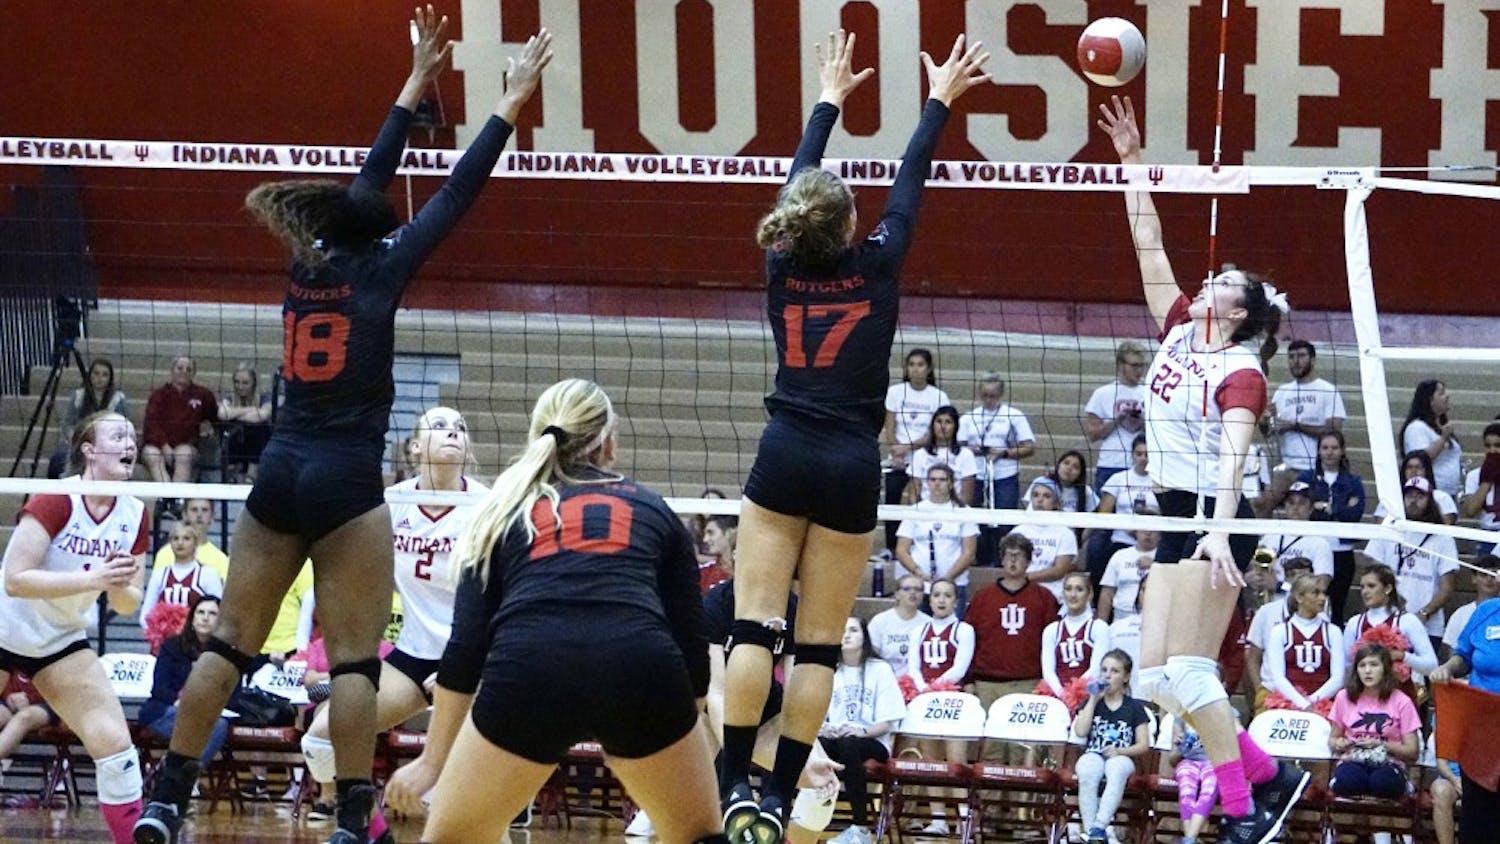 Freshman outside hitter Kamryn Malloy tips the ball over for a point against the Rutgers Scarlet Knights on Oct. 20 during a Big Ten match. IU finished the 2017 season 1-19 in conference play.